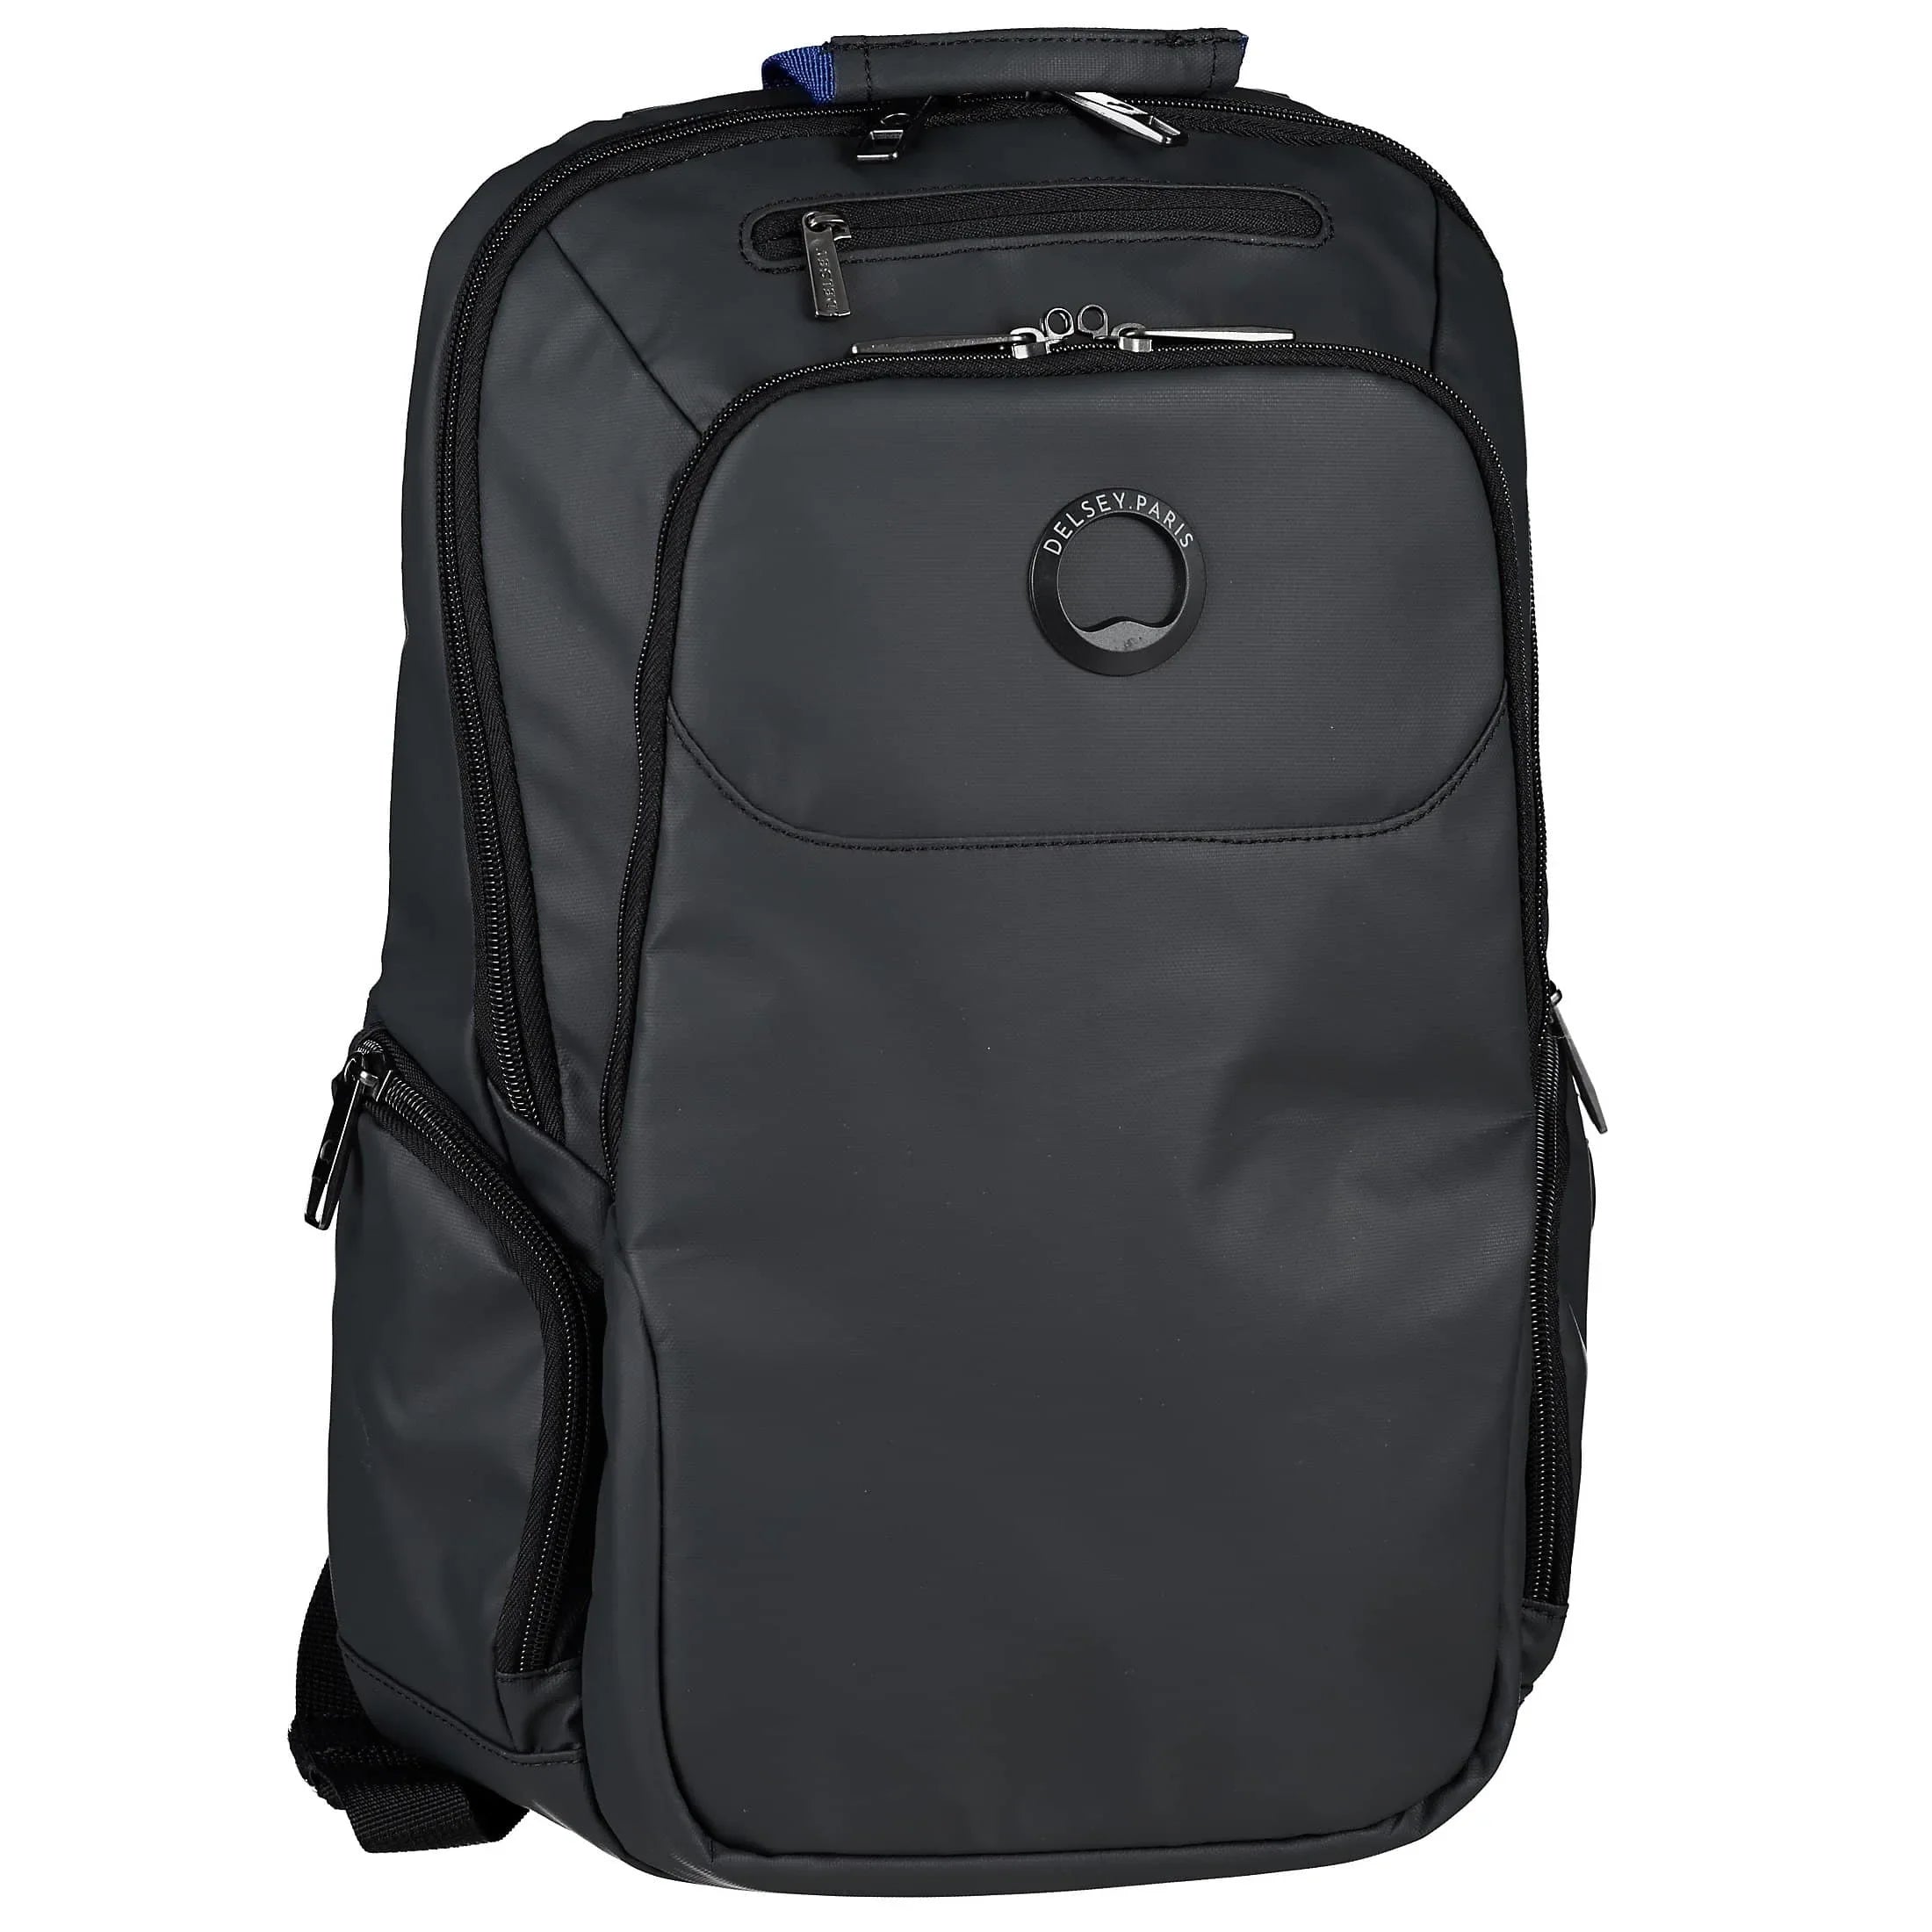 Delsey Parvis Plus leisure backpack 44 cm - gray